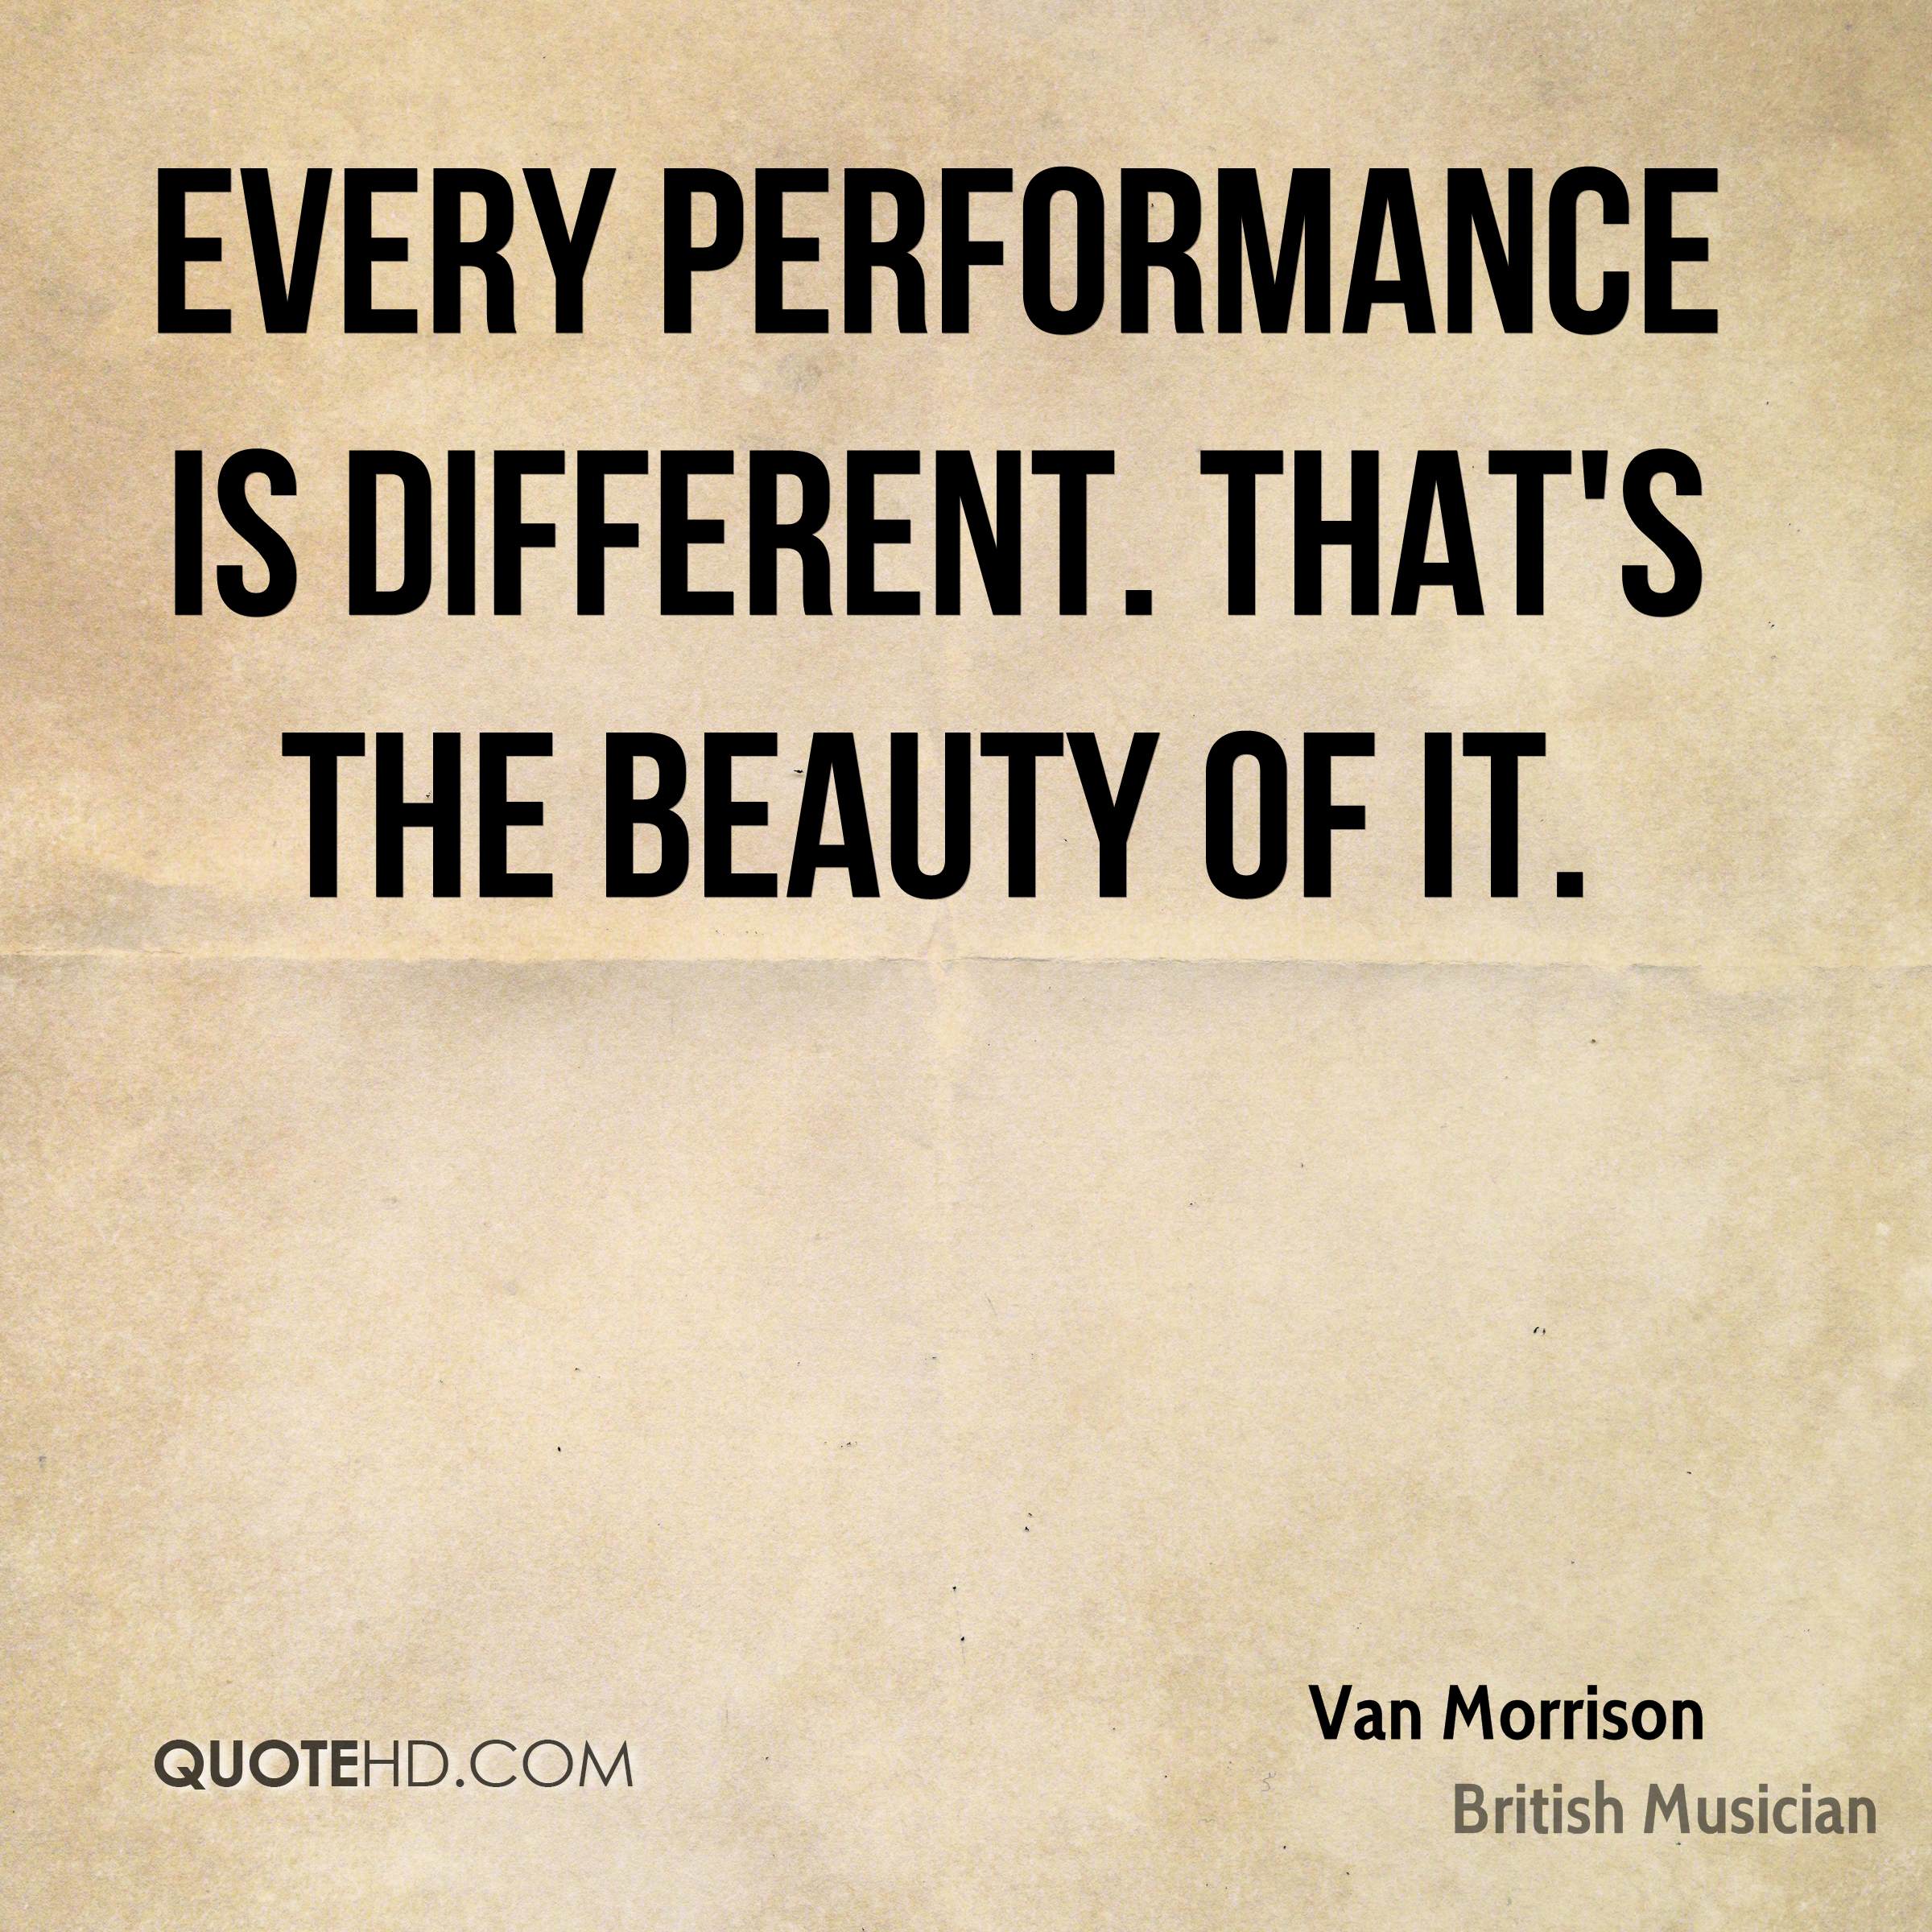 Every performance is different. That’s the beauty of it. Van Morrison